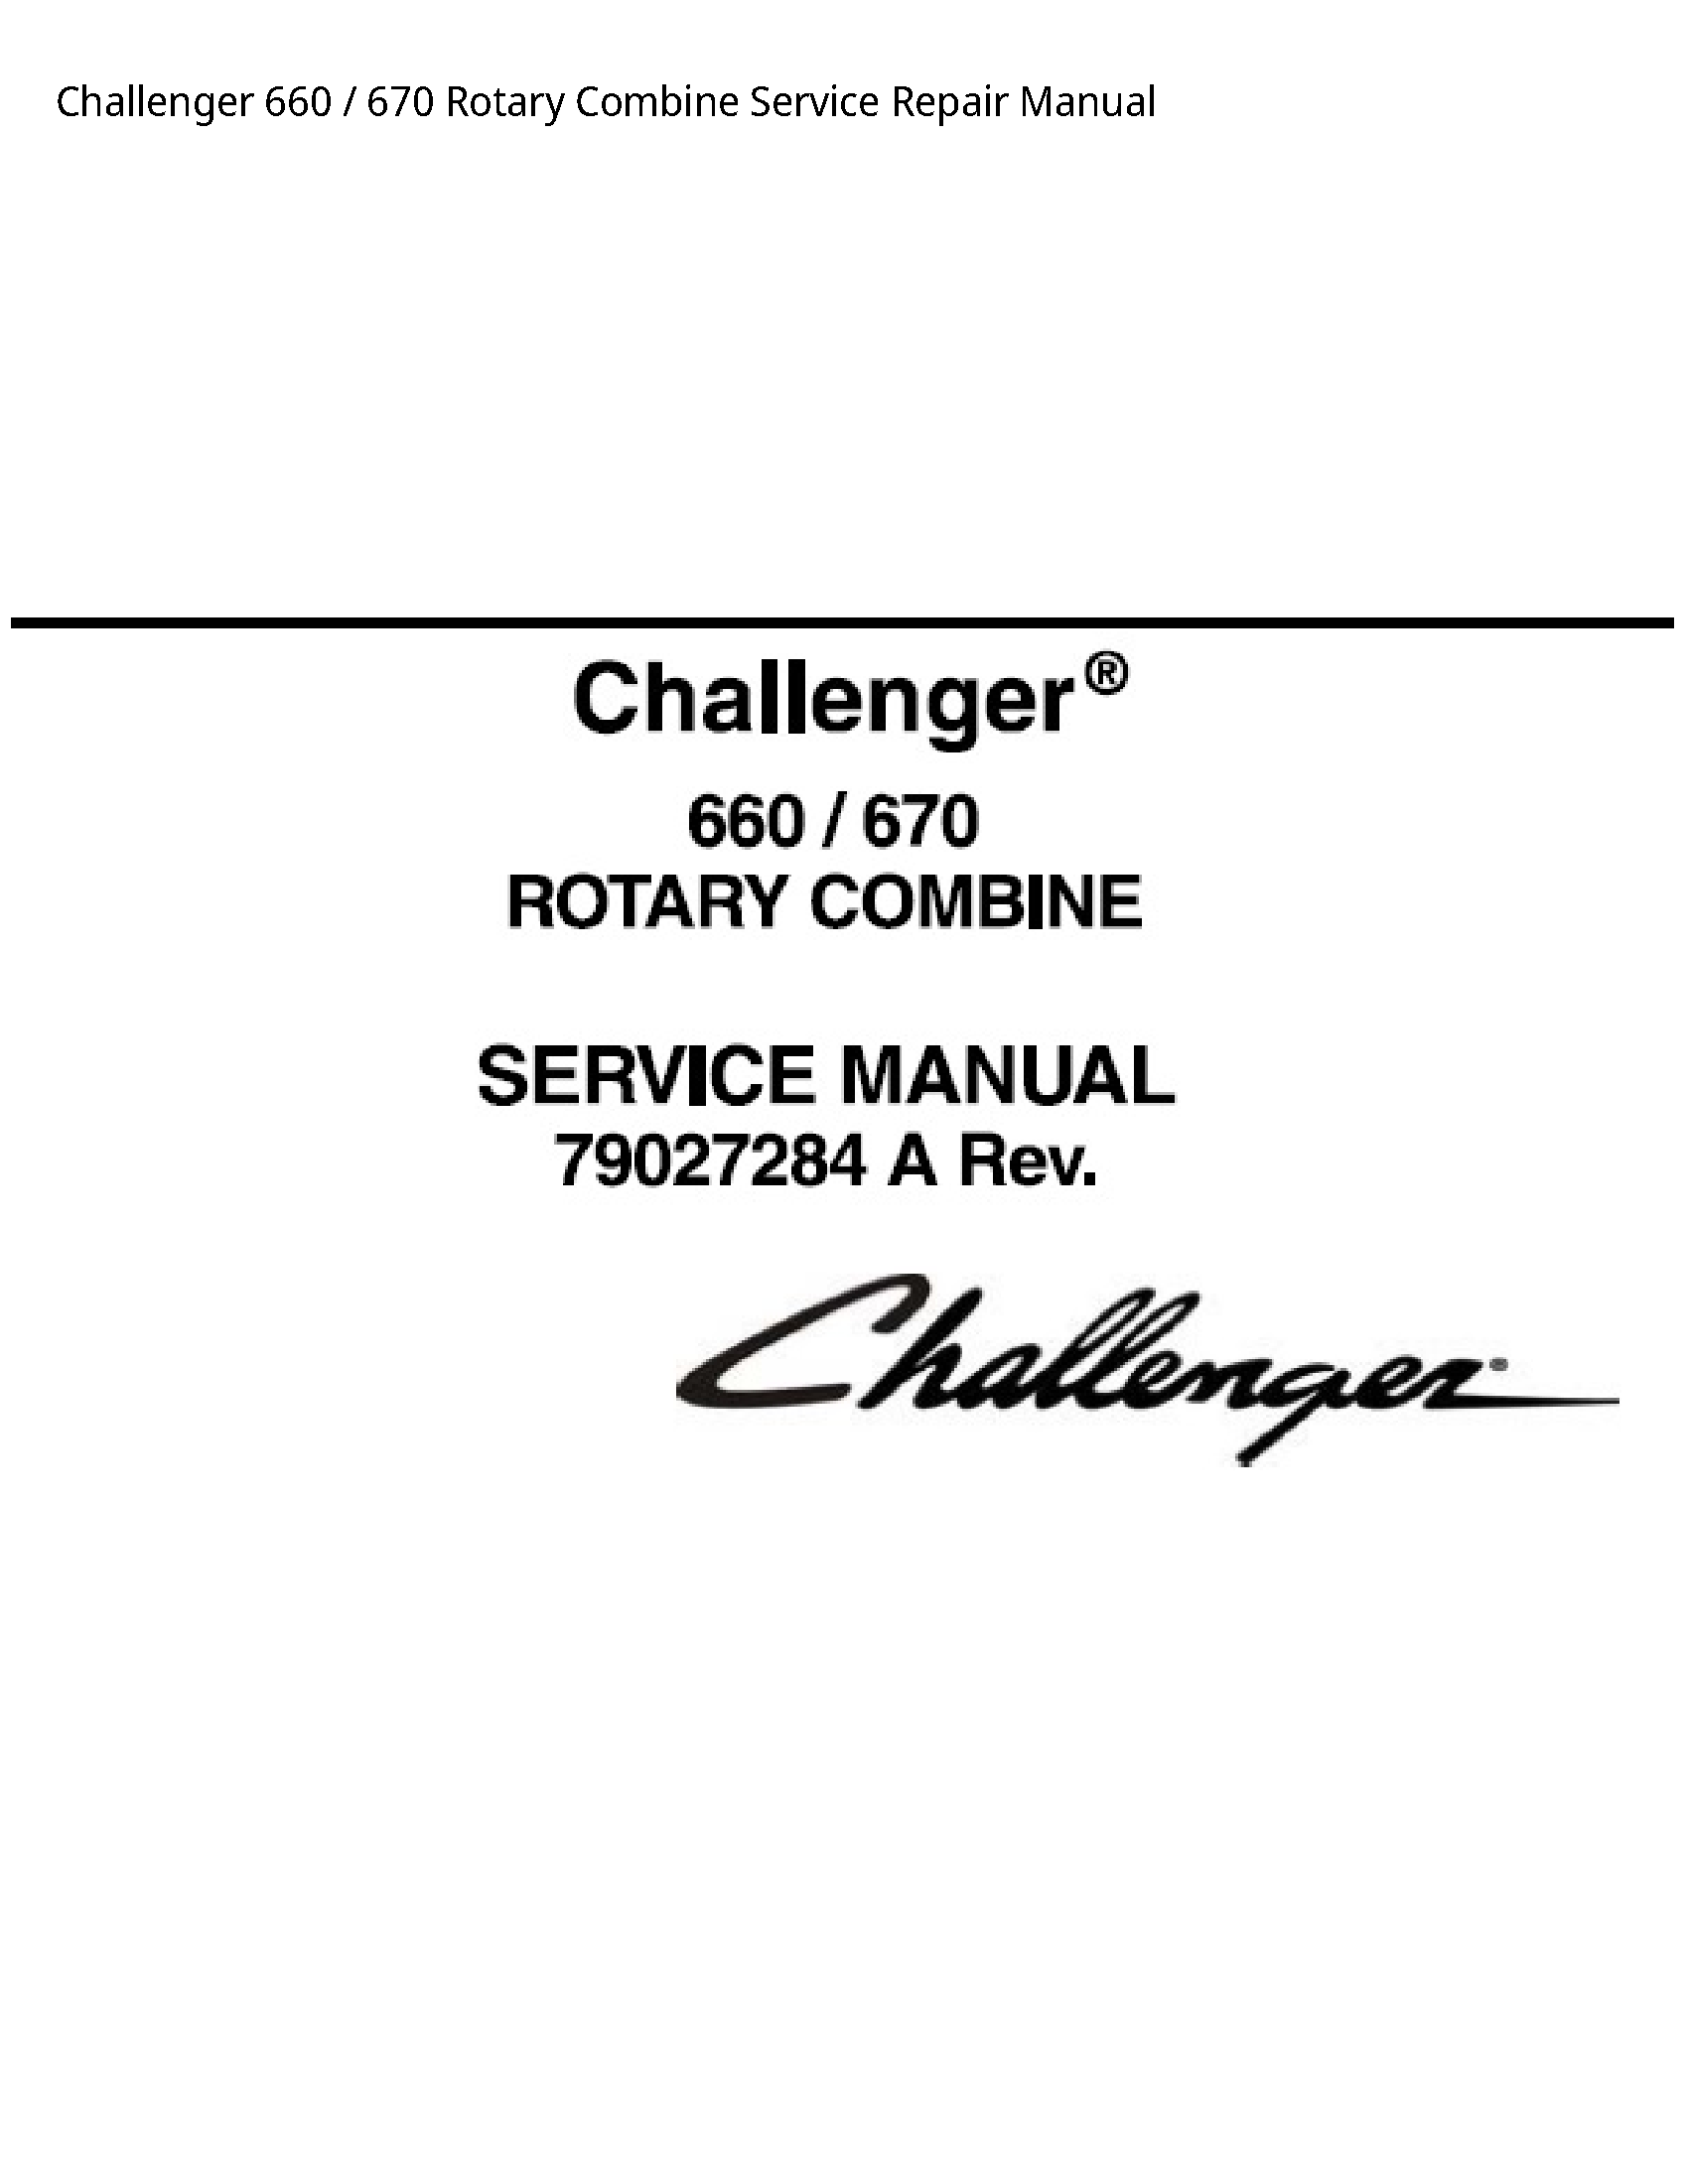 Challenger 660 Rotary Combine manual